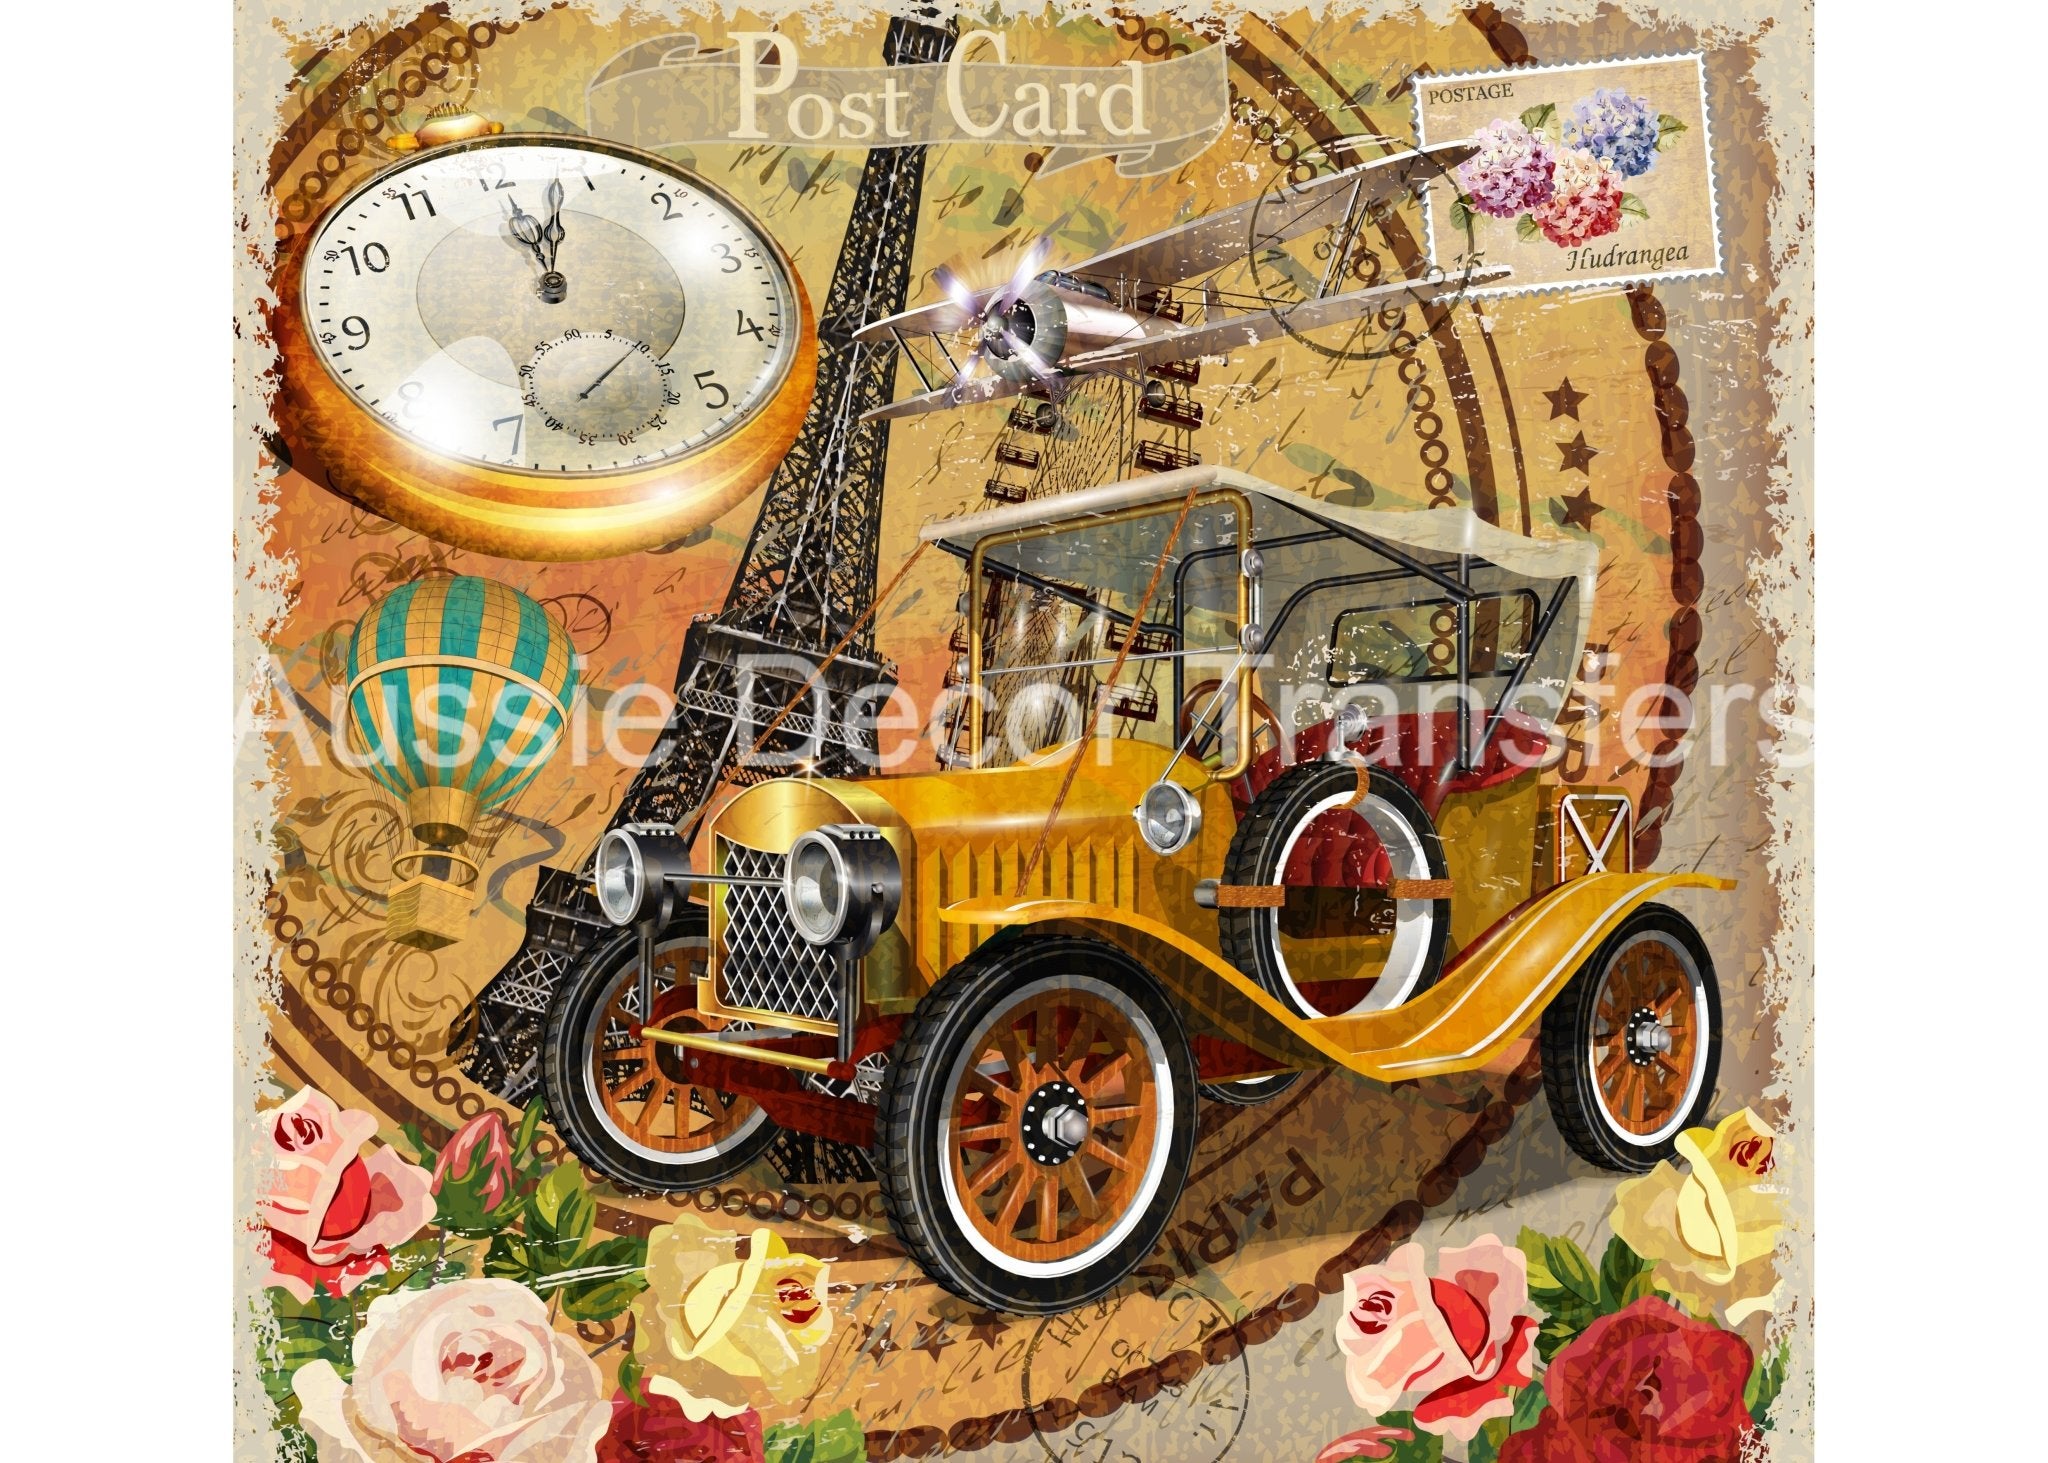 Aussie Decor Transfers Poster Print Gold Ford Postcard - Not Your Average Poster Print! - AUS ONLY